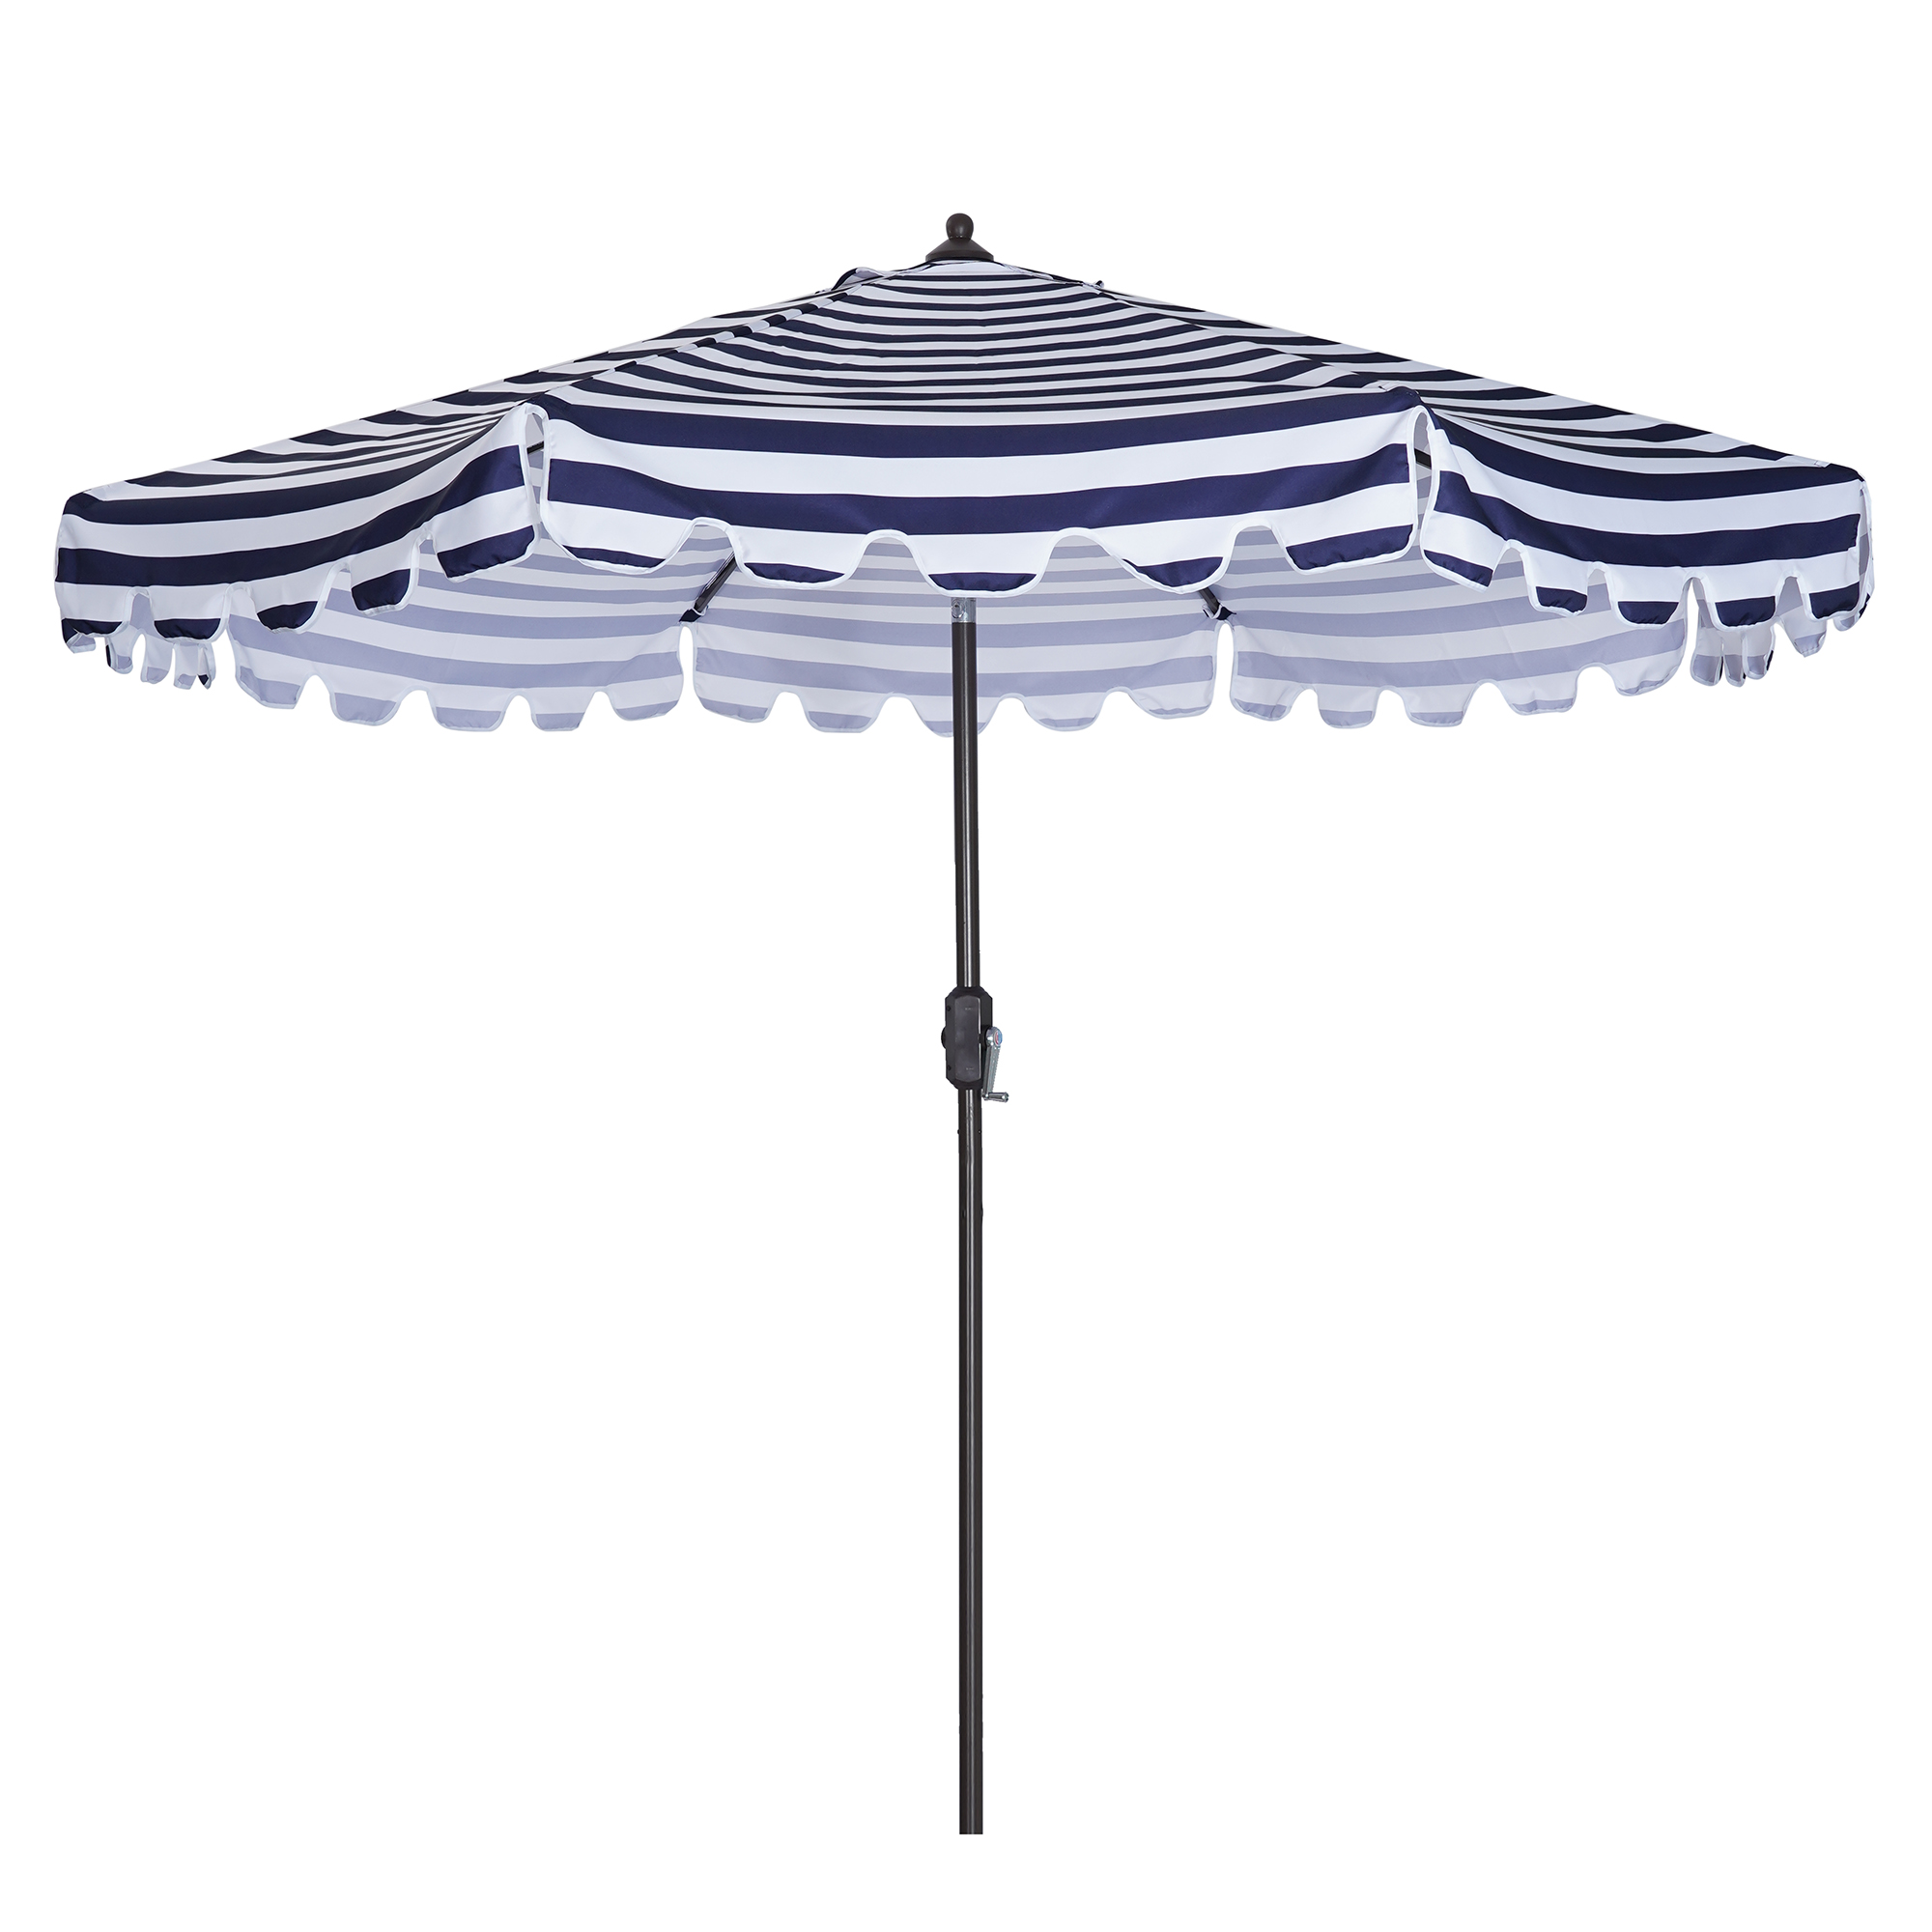 Outdoor Patio Umbrella 9-Feet Flap Market Table Umbrella 8 Sturdy Ribs with Push Button Tilt and Crank, blue/white with Flap[Umbrella Base is not Included]-Boyel Living